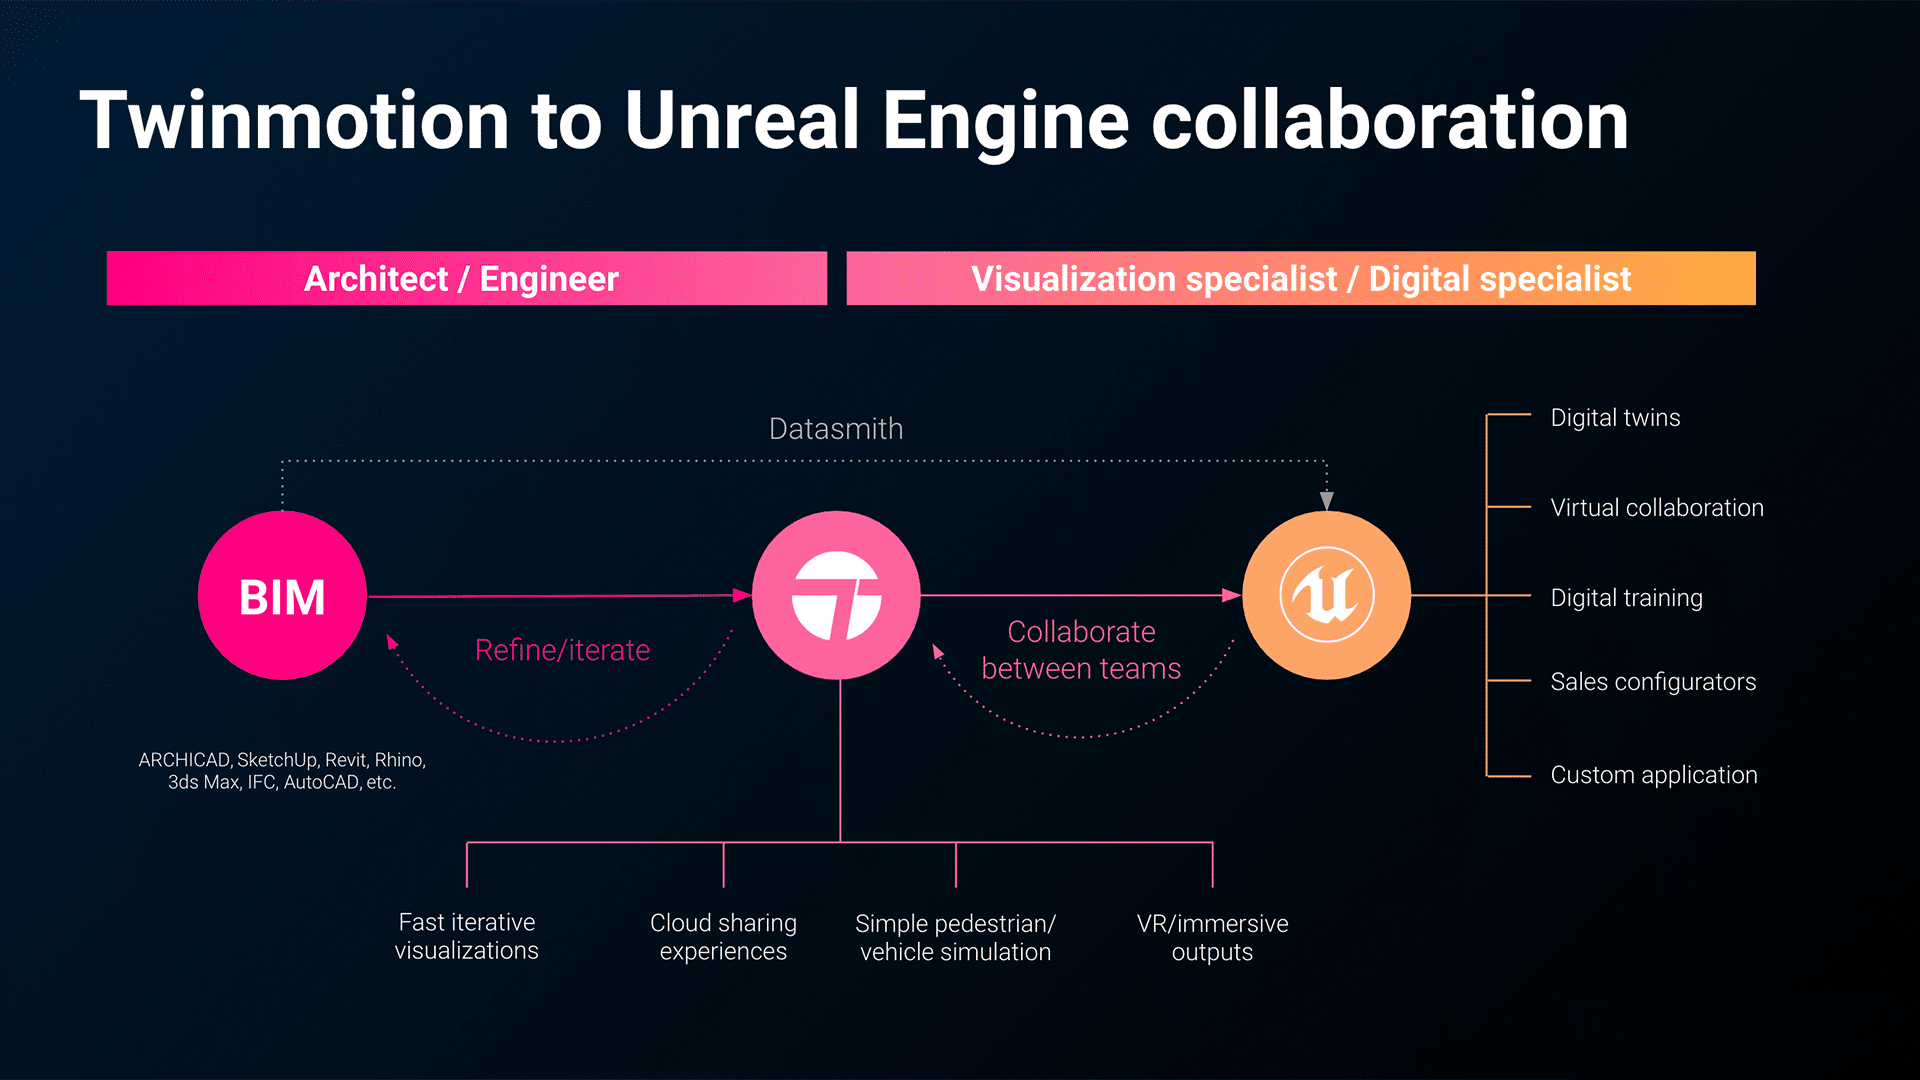 compare unreal and twinmotion